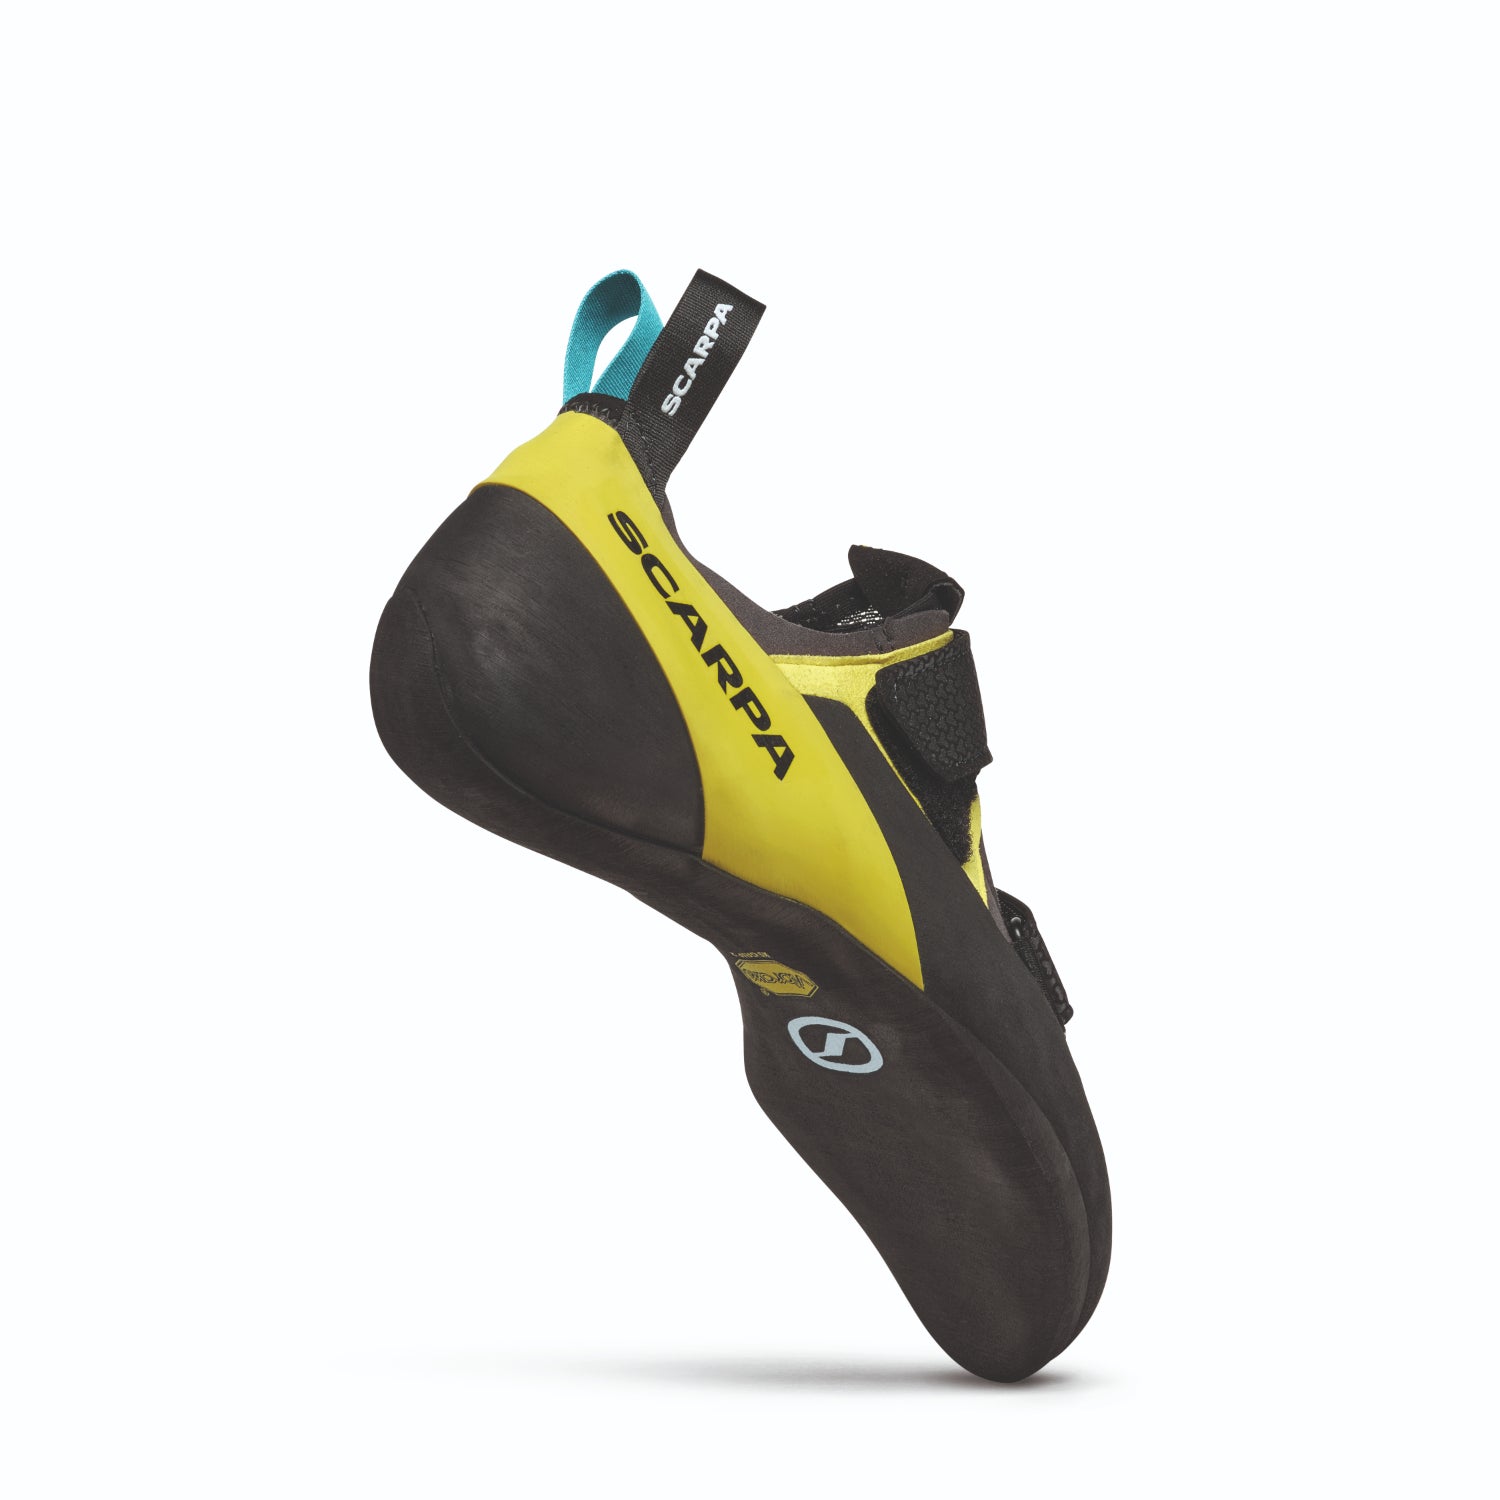 Scarpa Arpia climbing shoes in shark black and yellow